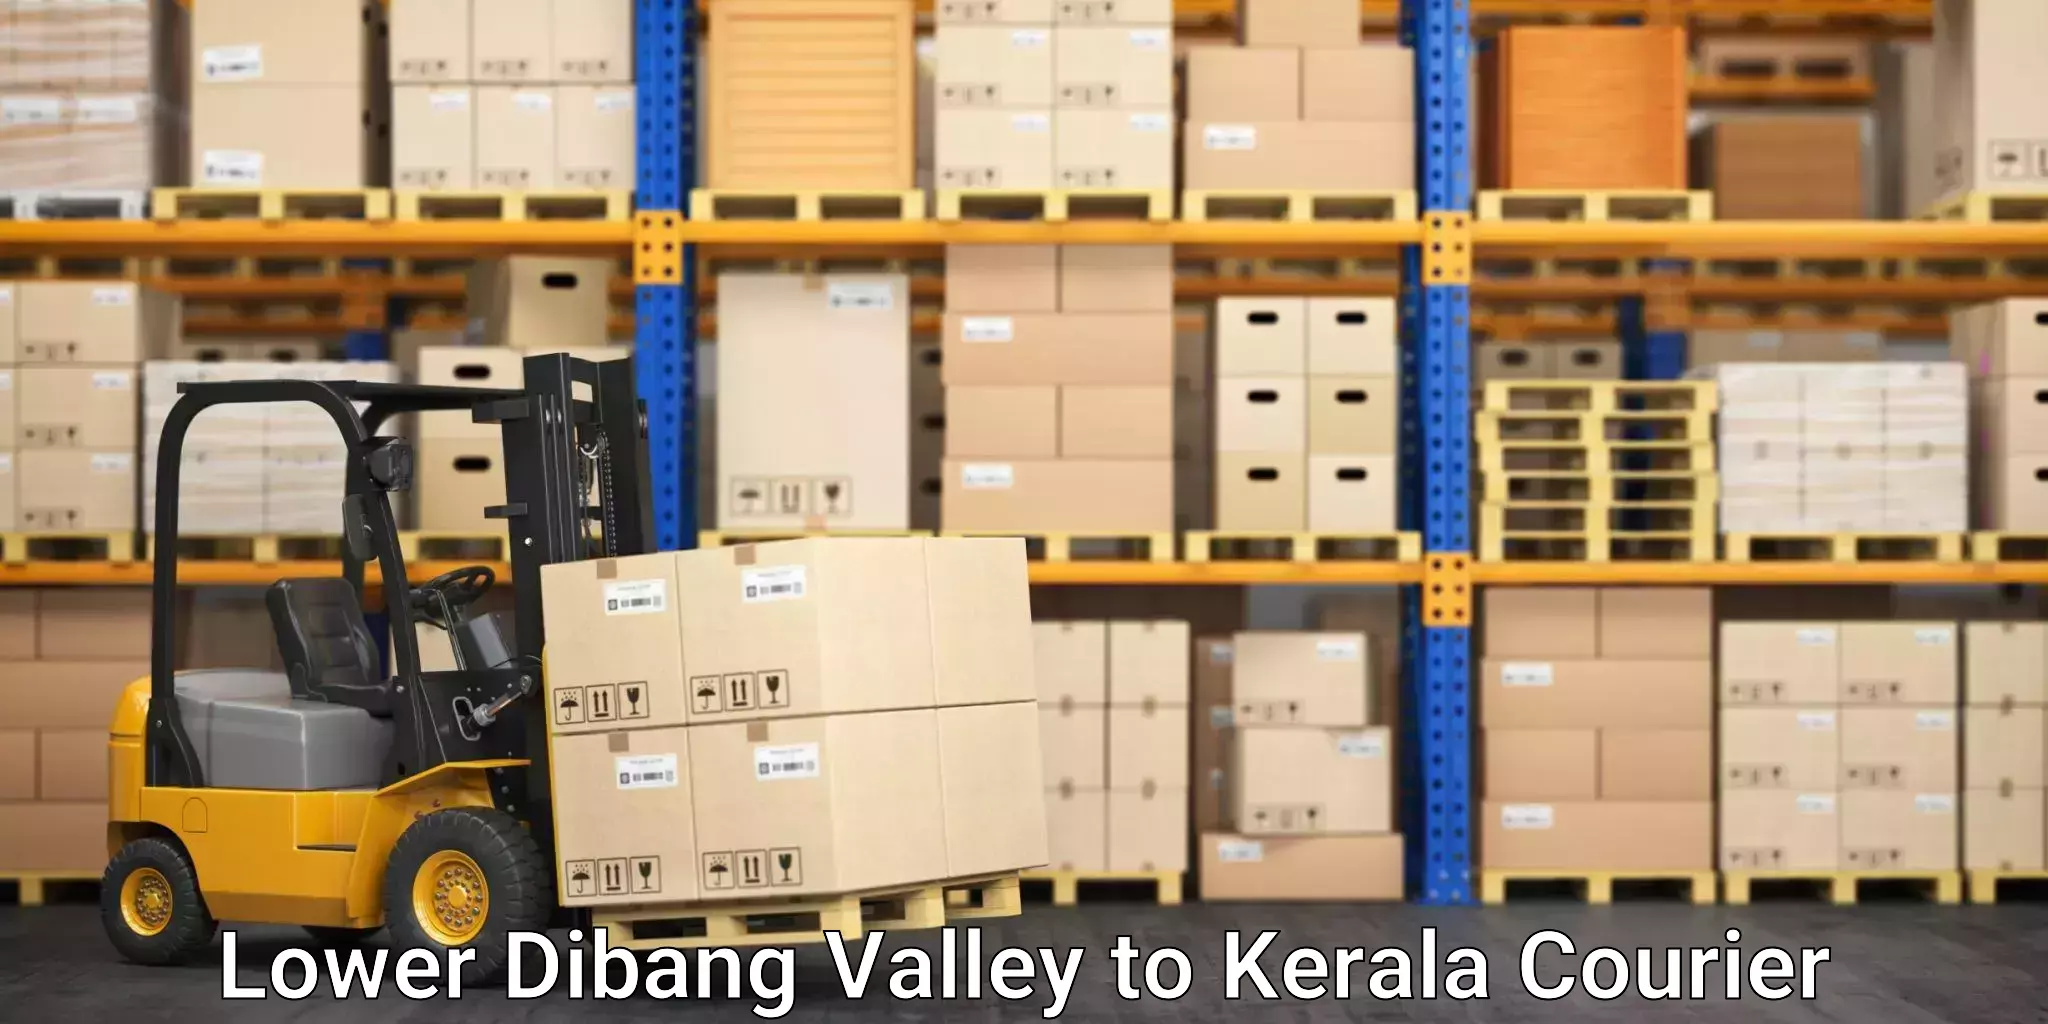 Express delivery network Lower Dibang Valley to Kerala